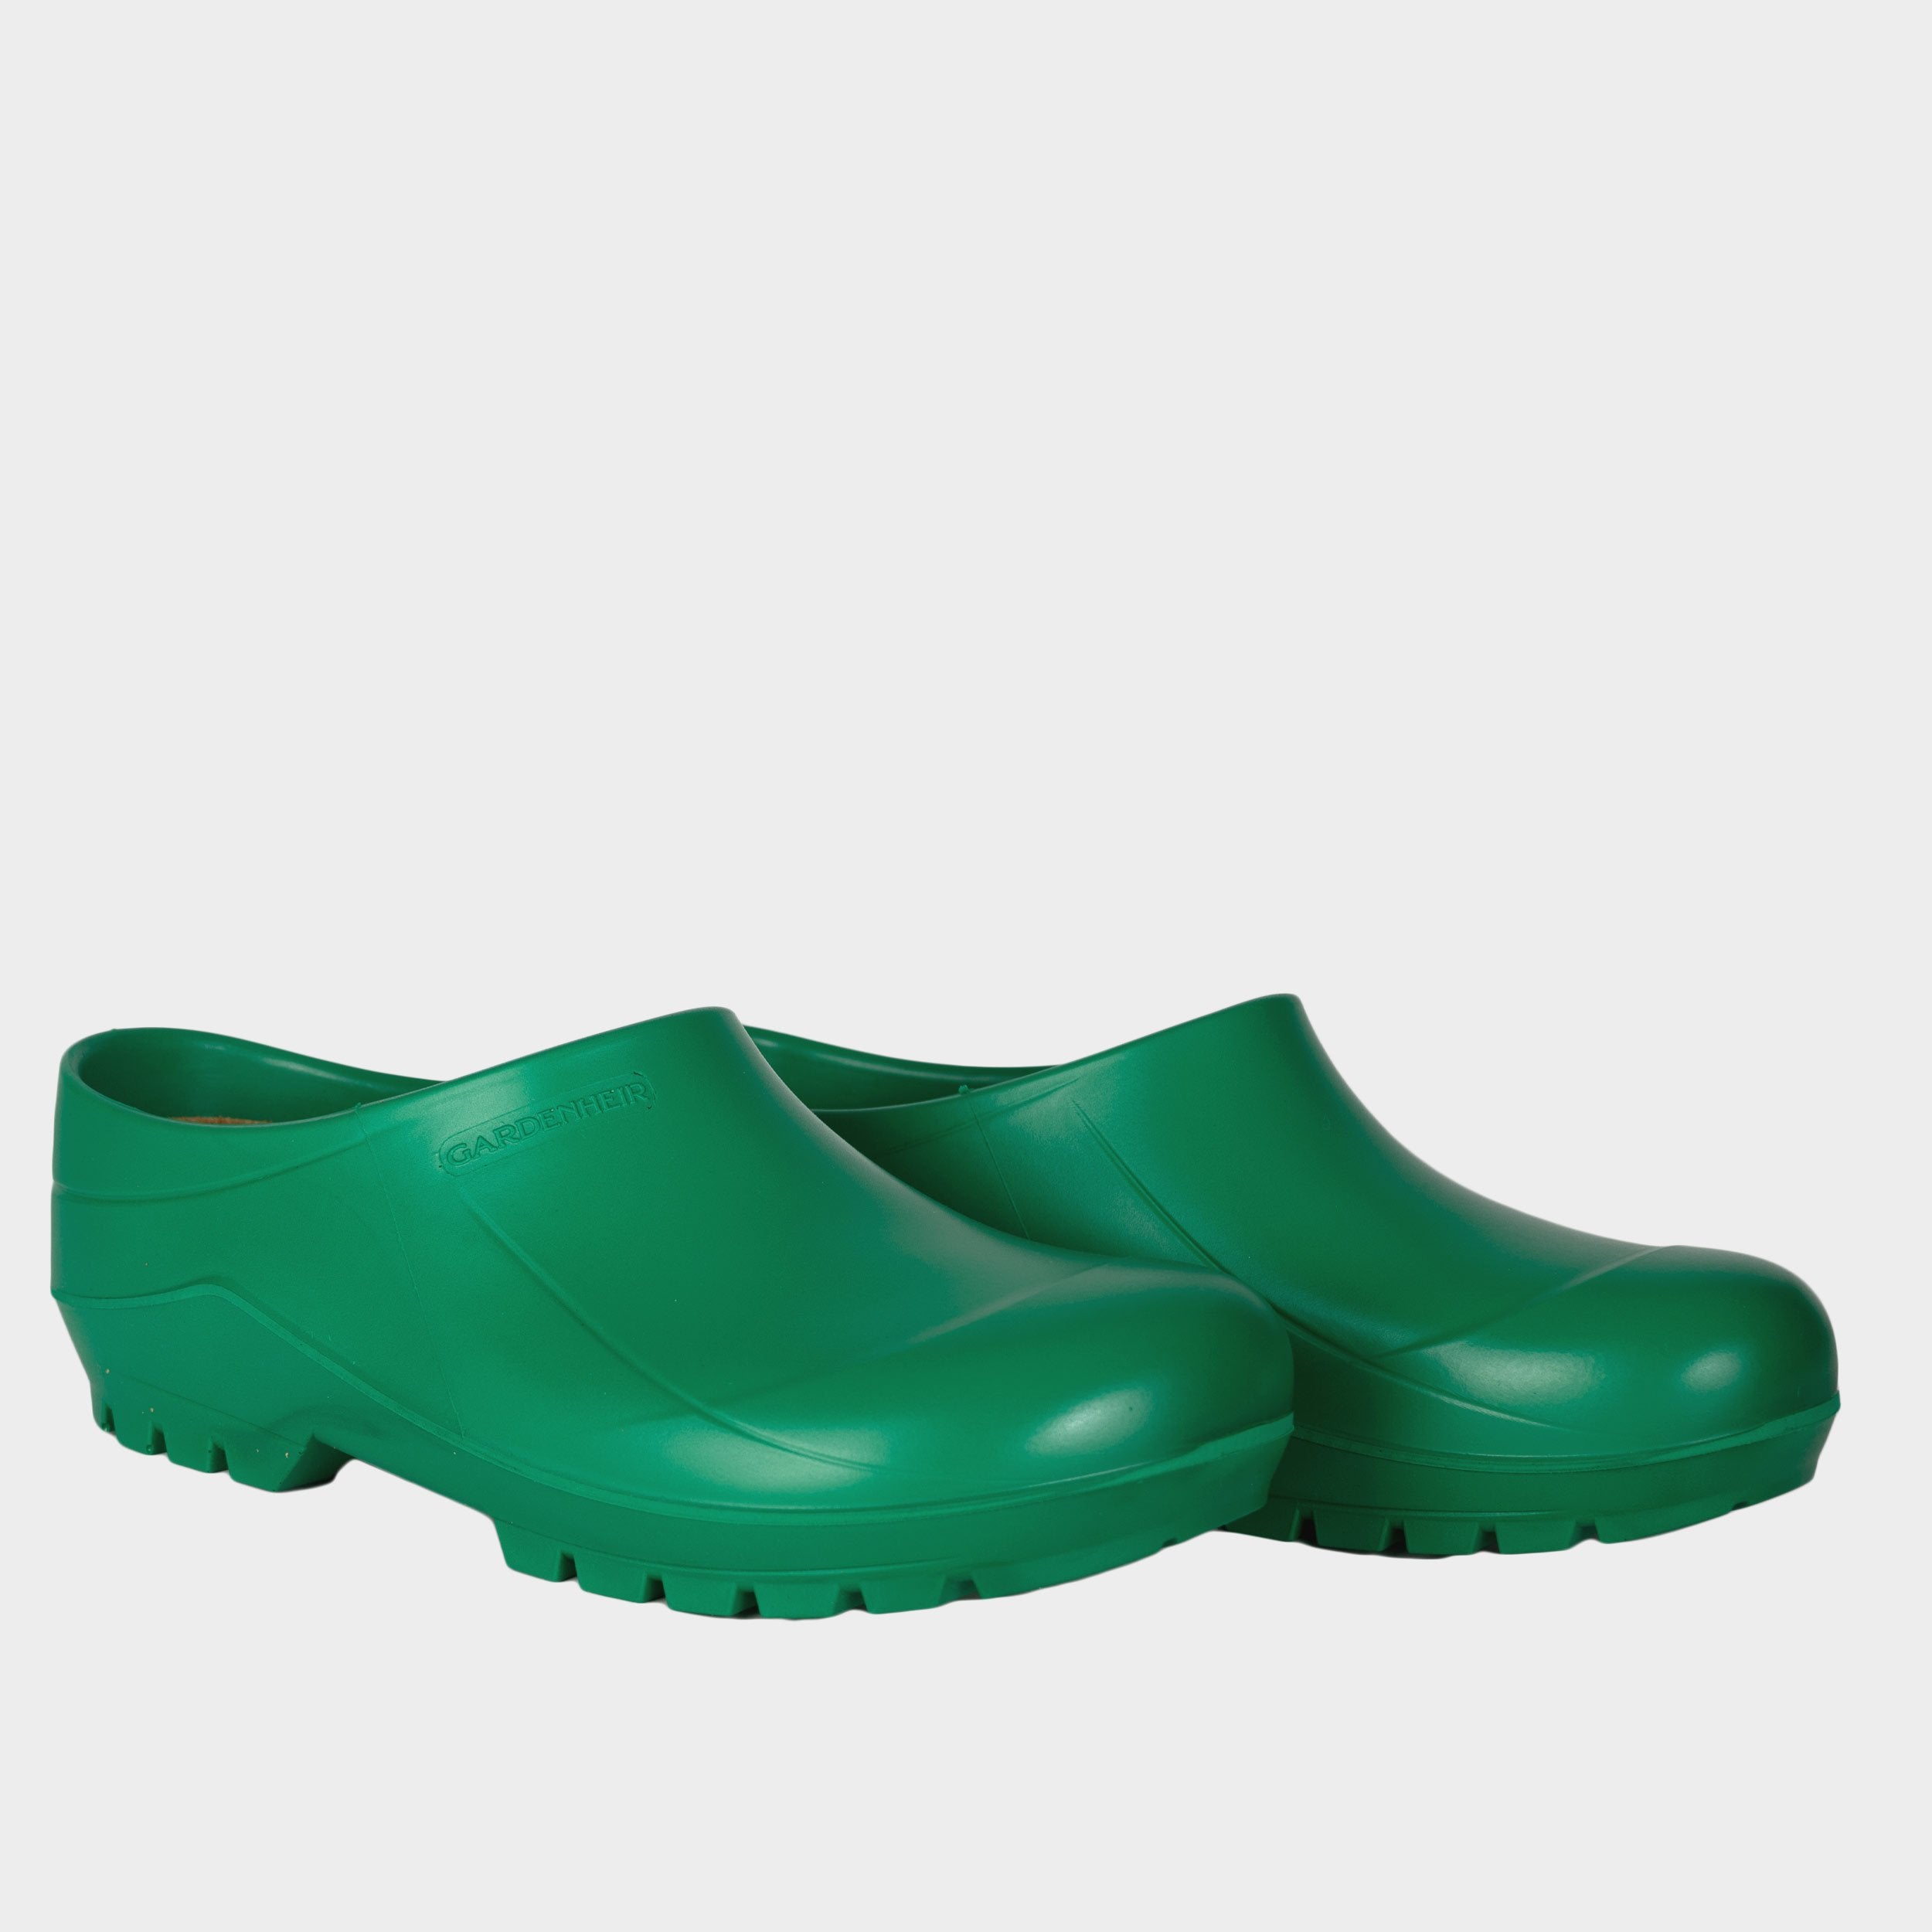 Italian Garden Clogs in Clover- Limited Edition